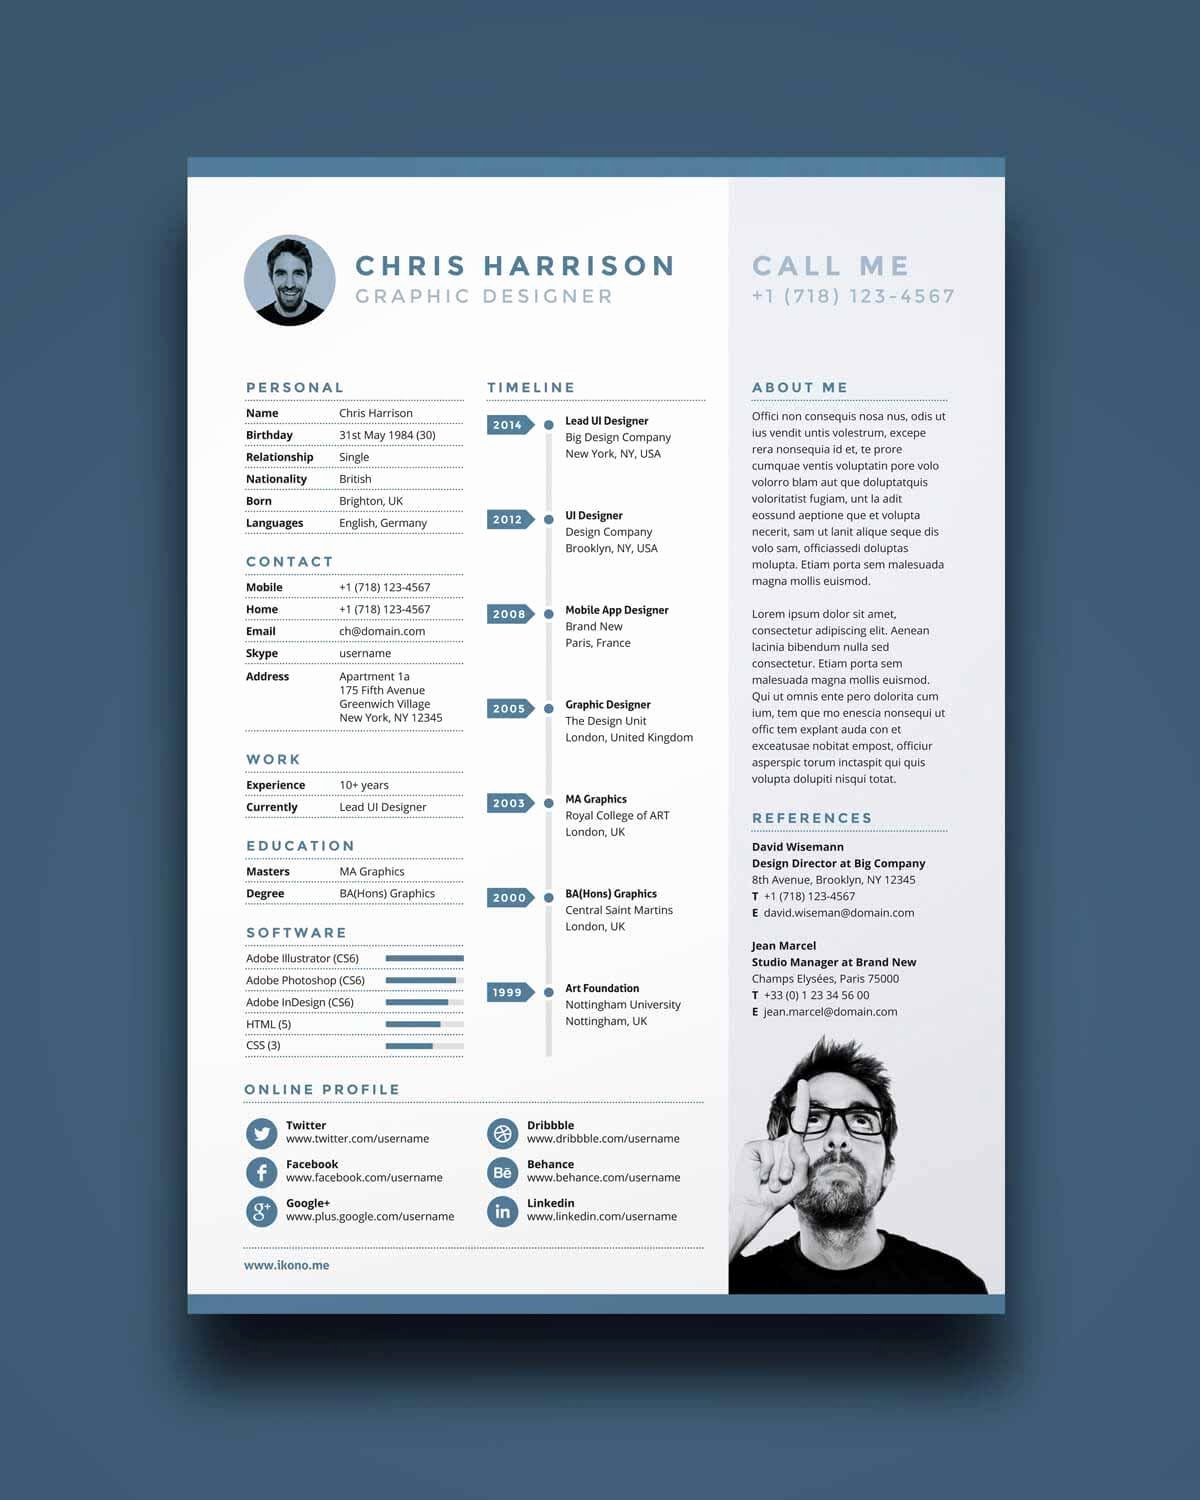 One Page Resume Examples Fresh E Page Resume Templates 15 Examples to Download and Use now